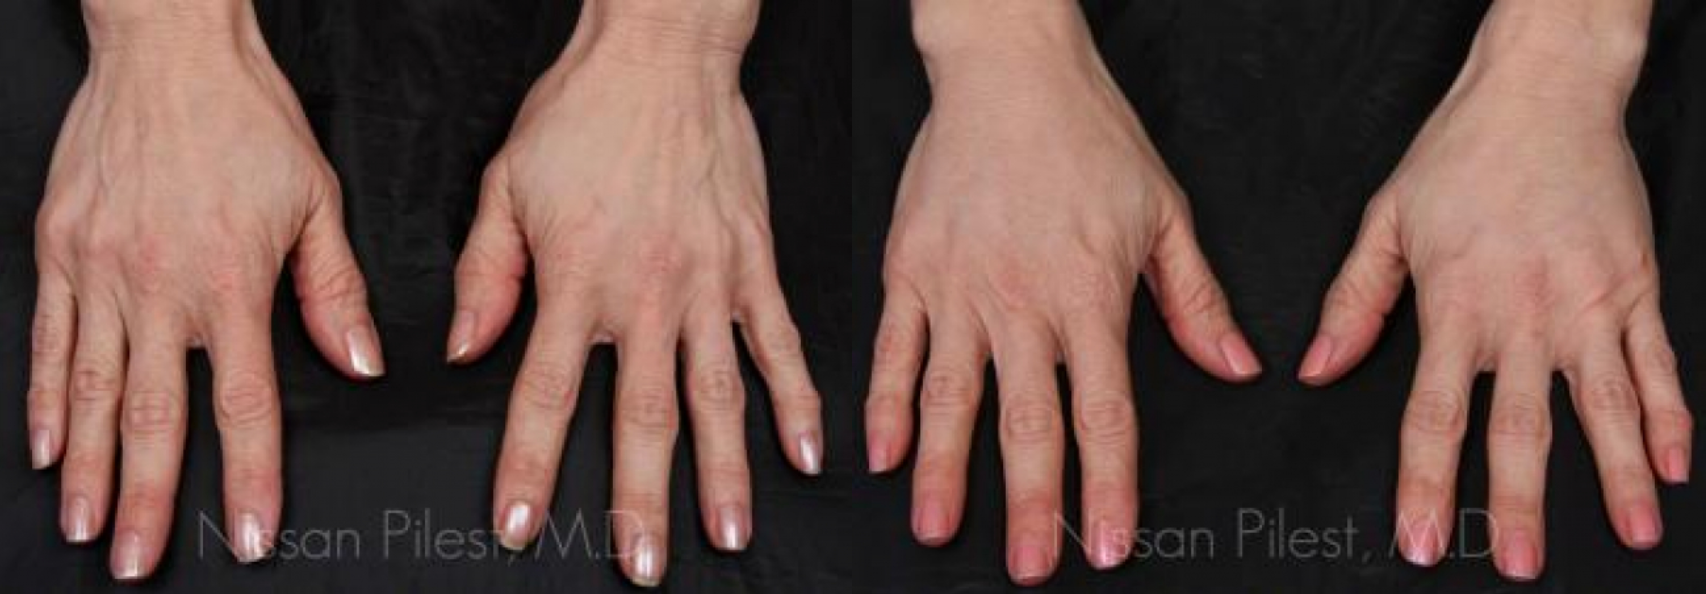 Irvine Hand Treatment Before & After